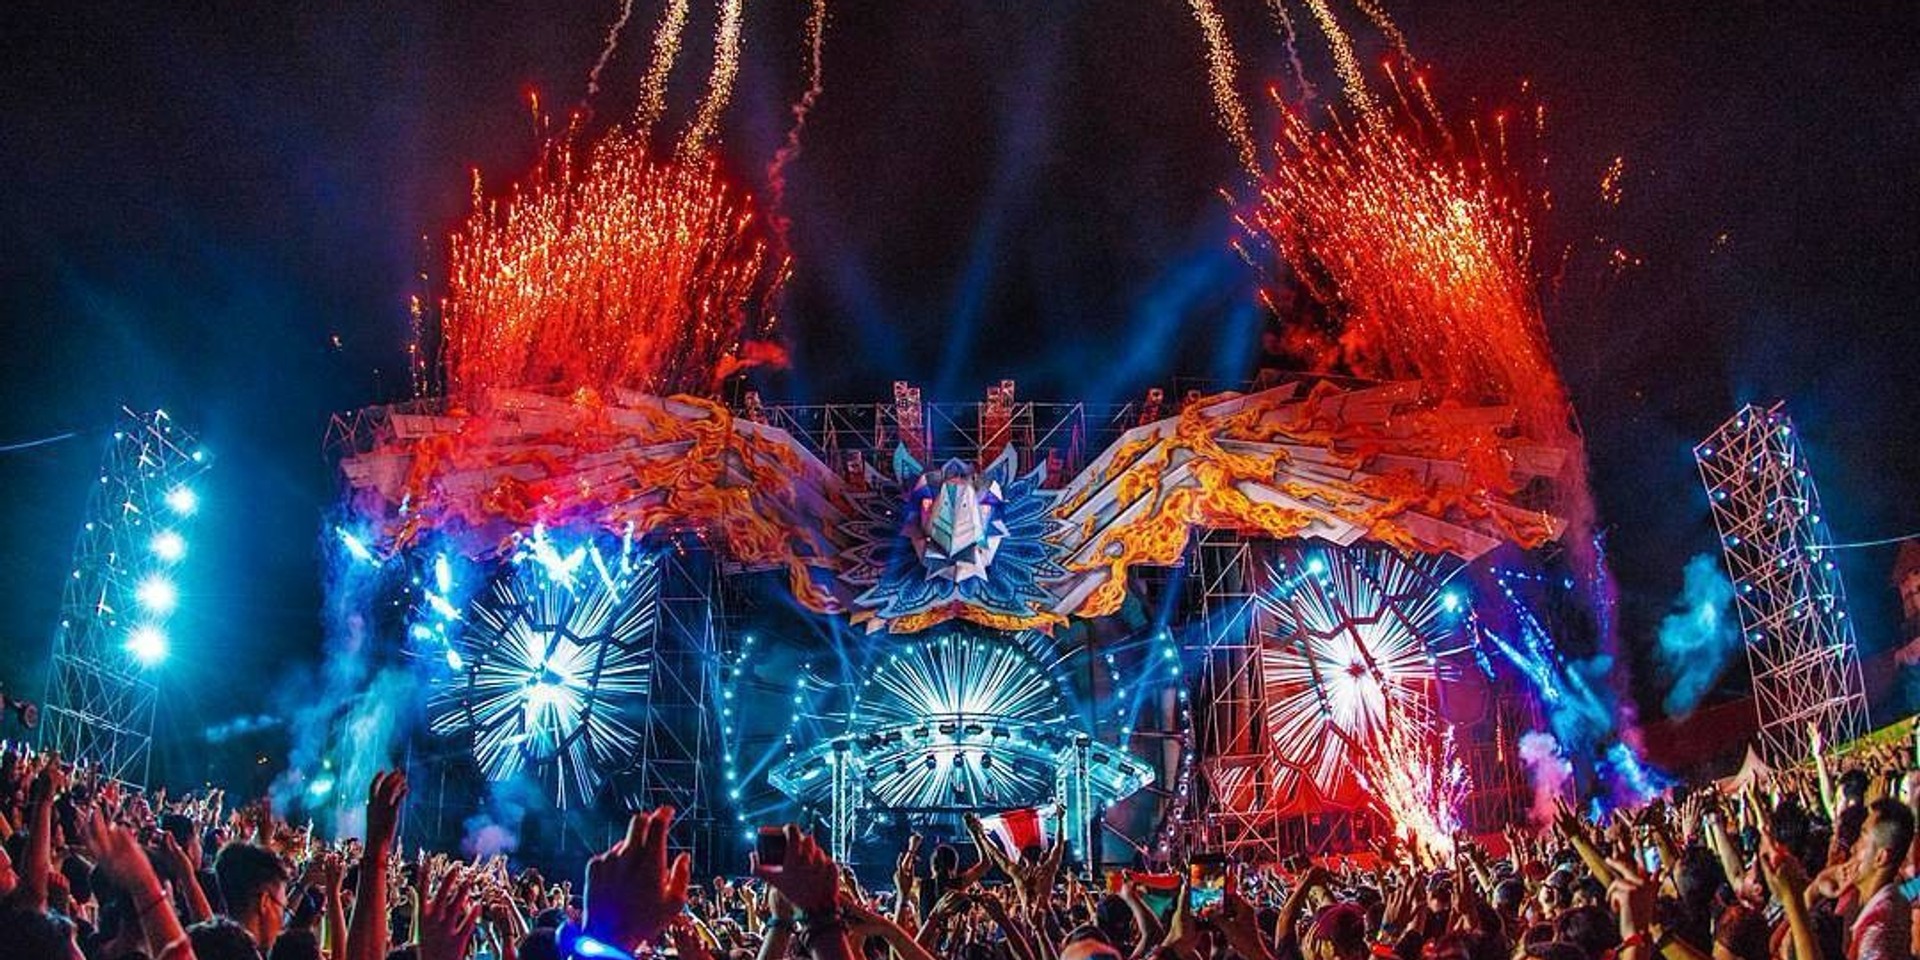 Djakarta Warehouse Project set to expand into China in 2018